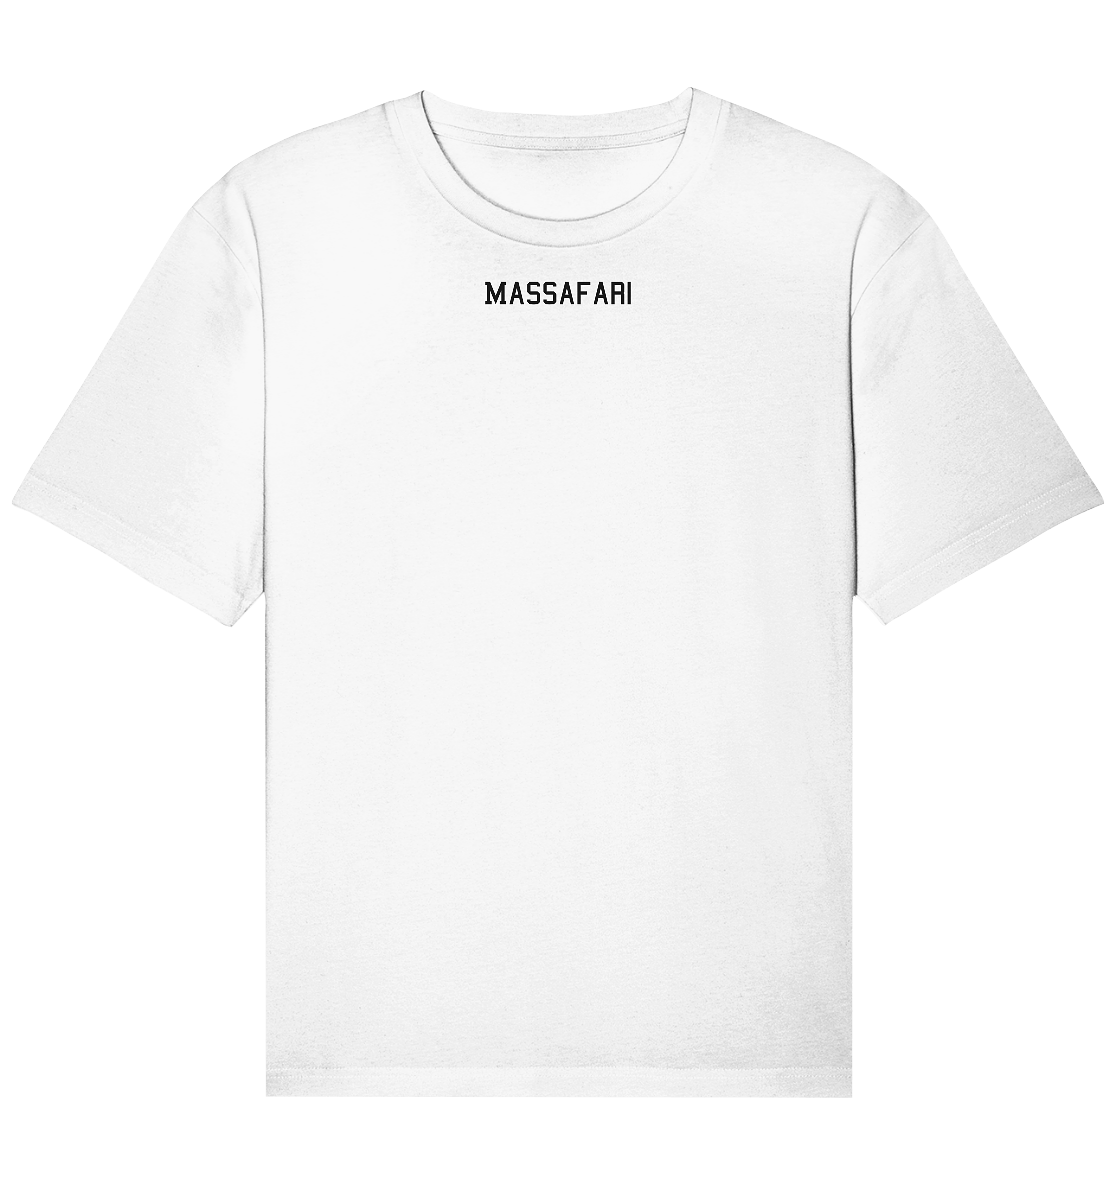 front-organic-relaxed-shirt-f8f8f8-1116x-11.png